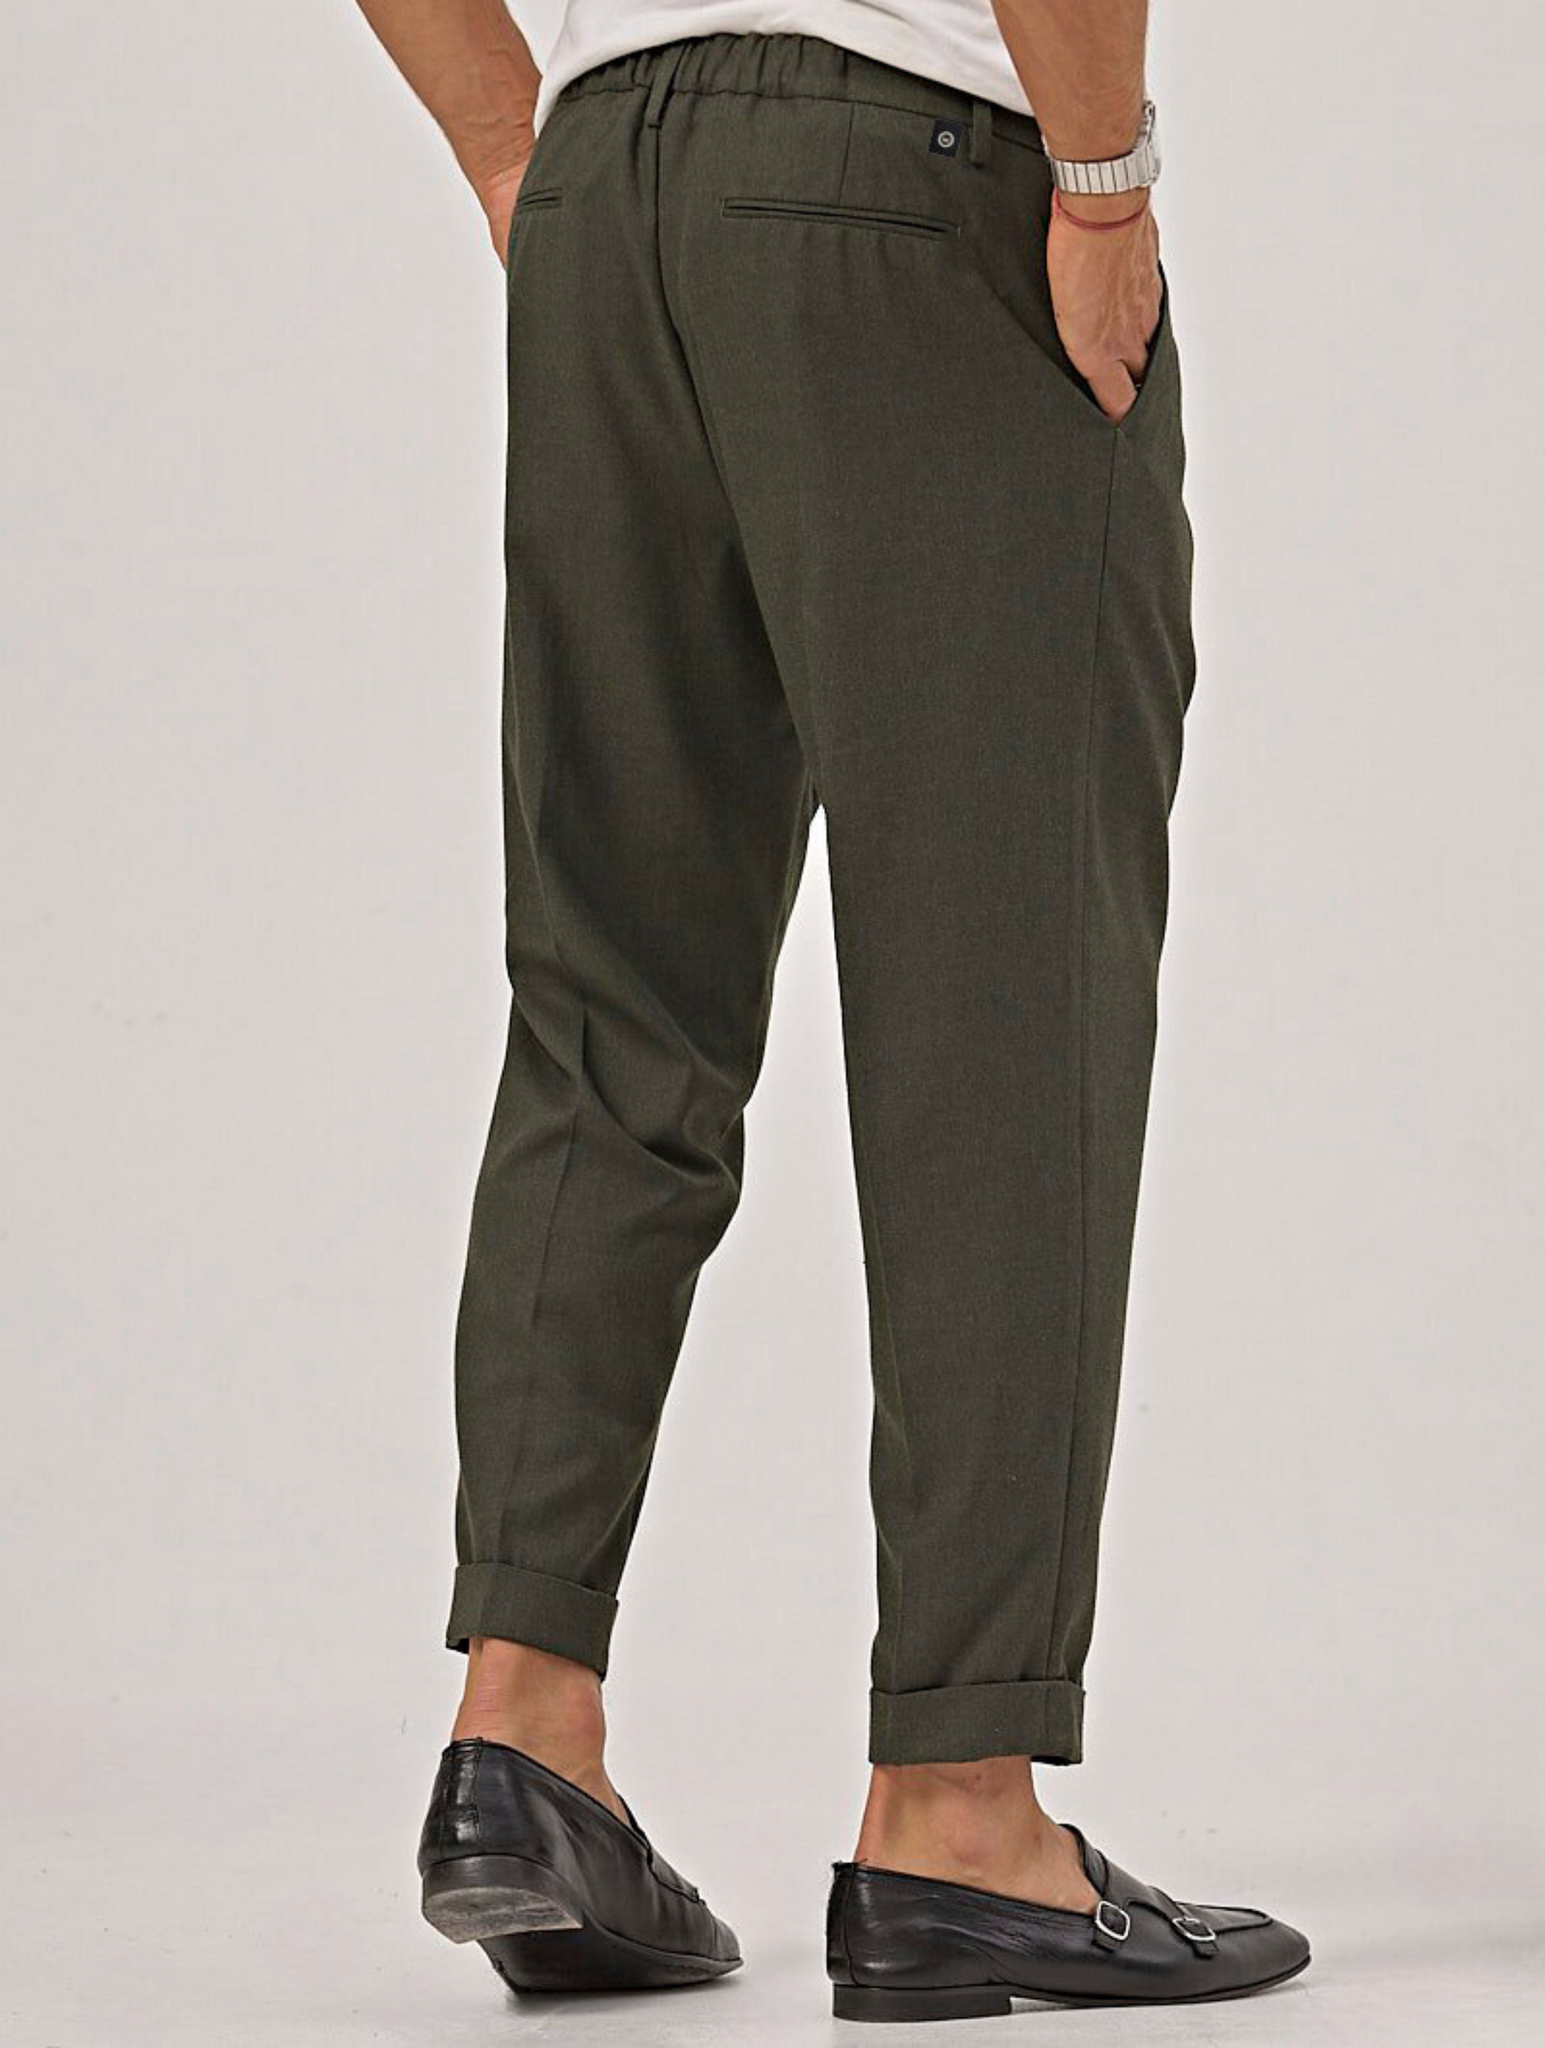 TOKYO CASUAL PANTS IN ARMY GREEN